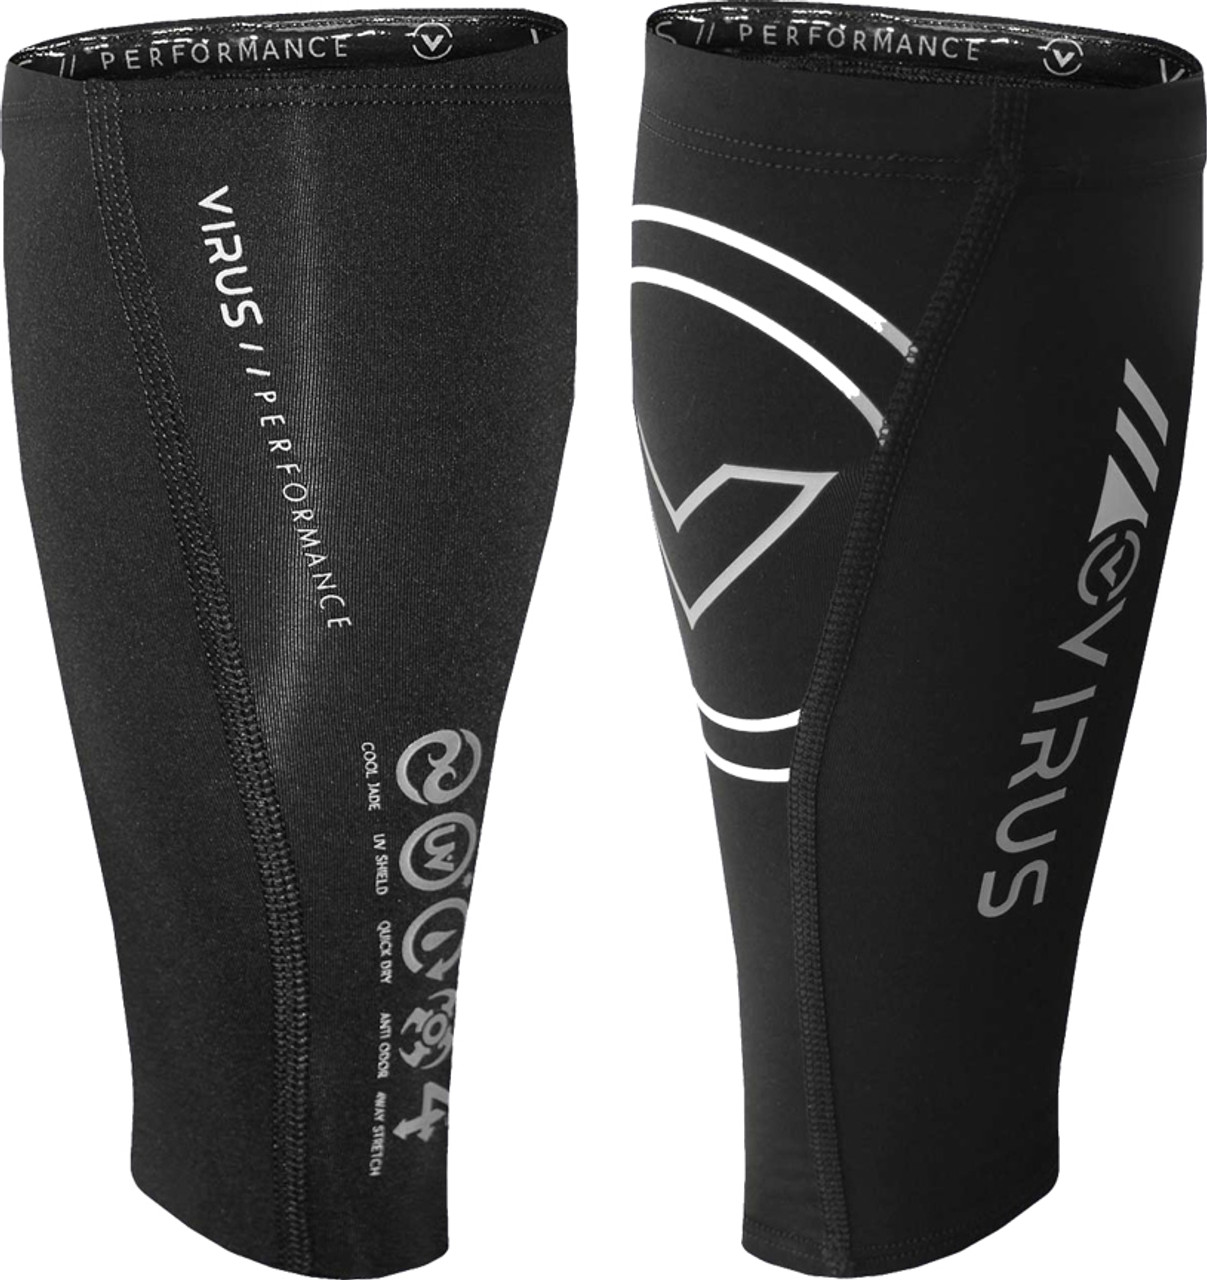 Compression Calf Sleeves (Pair)